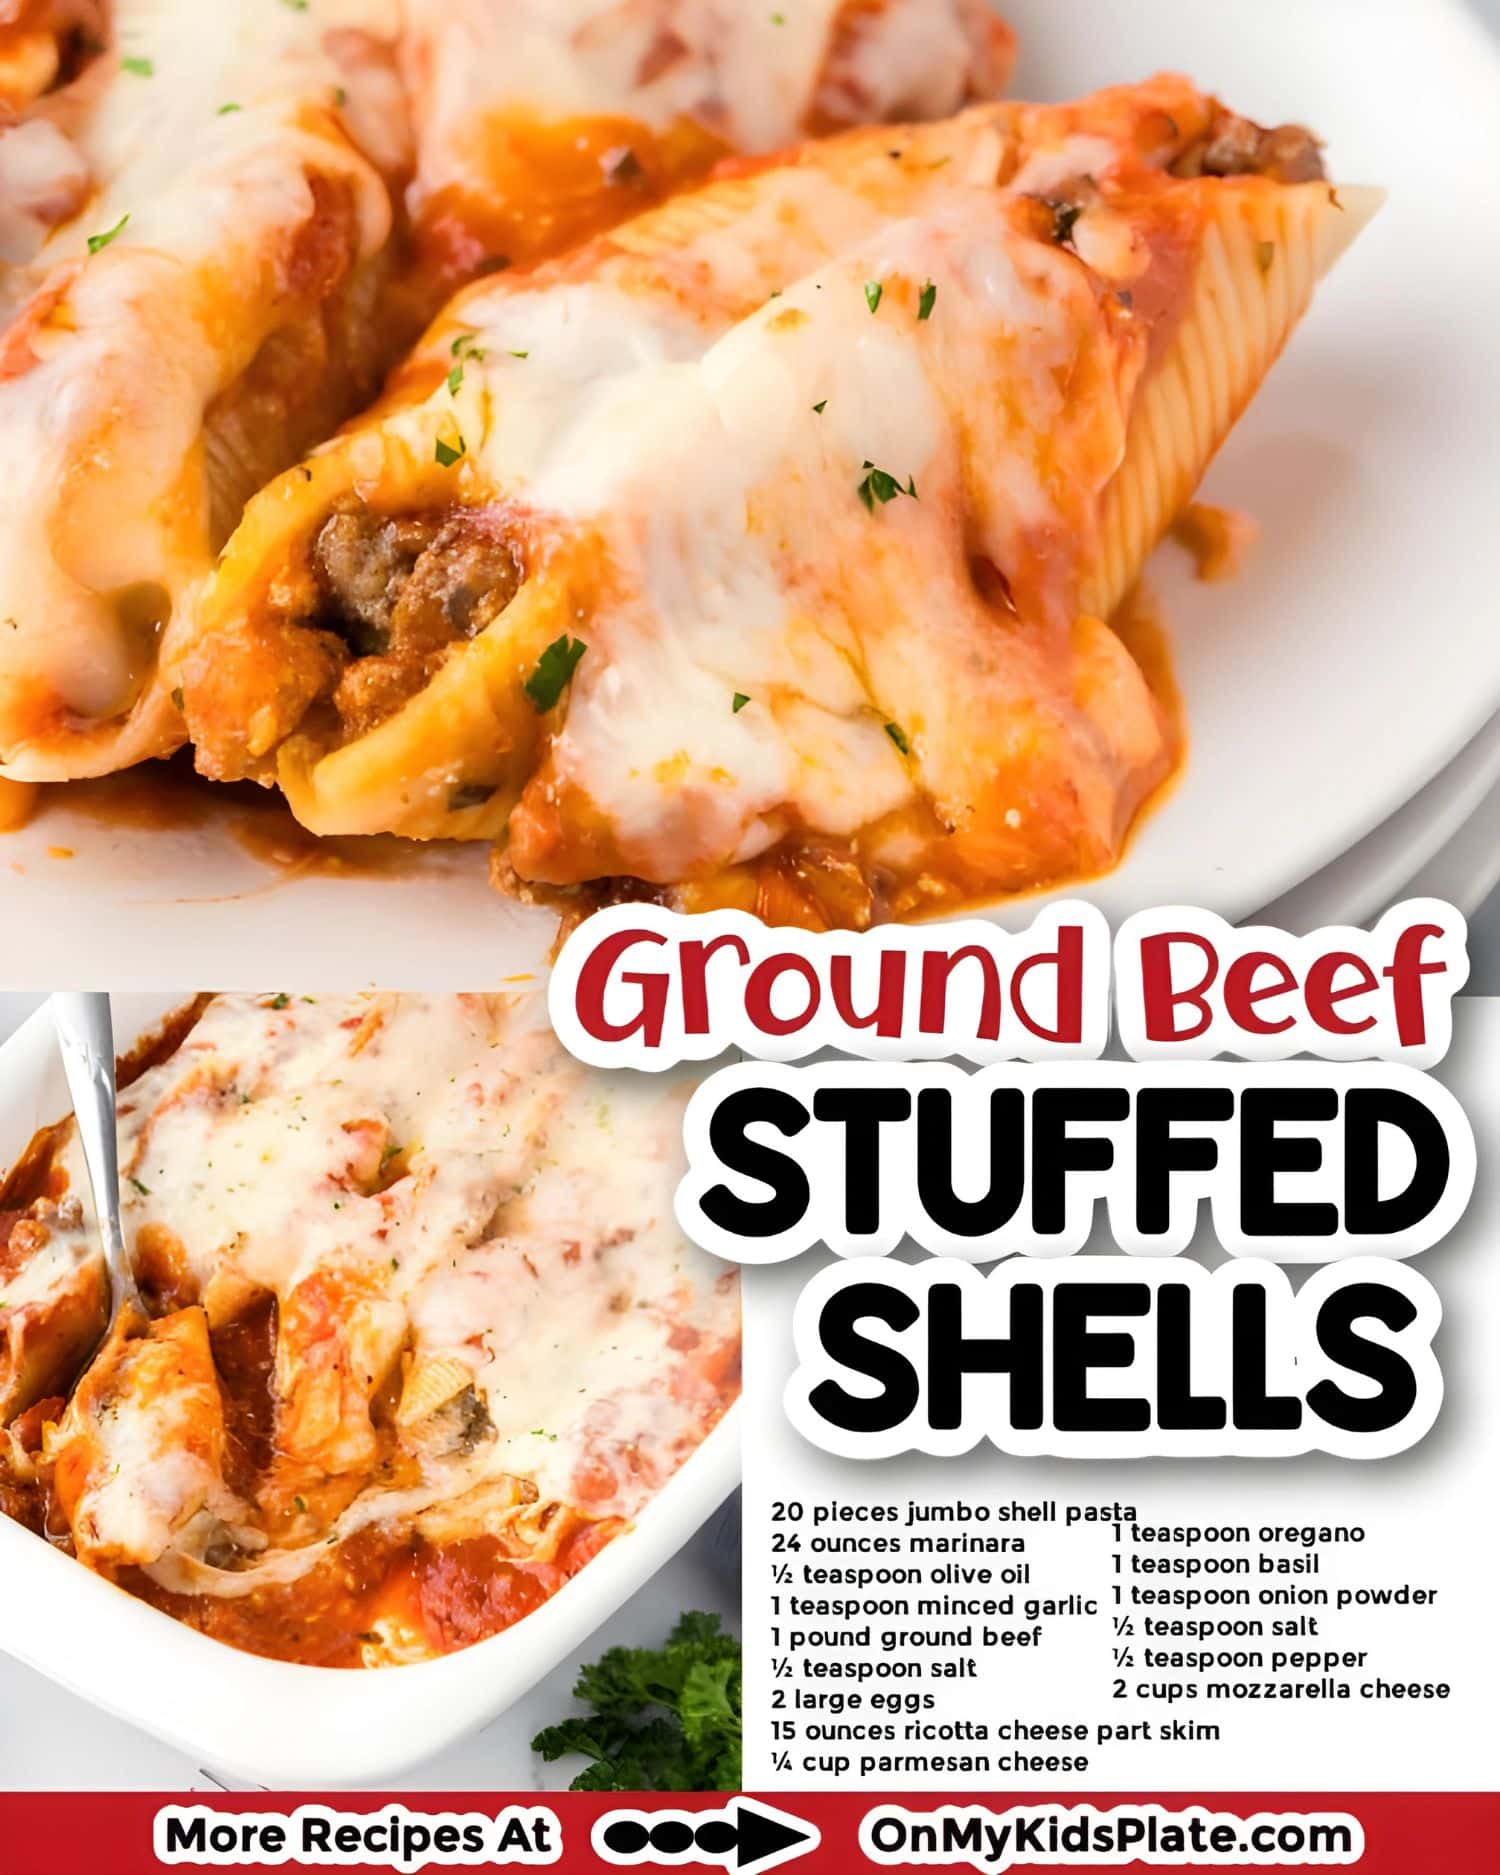 An appealing image of baked stuffed shells with ground beef and melted cheese, garnished with herbs. A recipe list and the text 